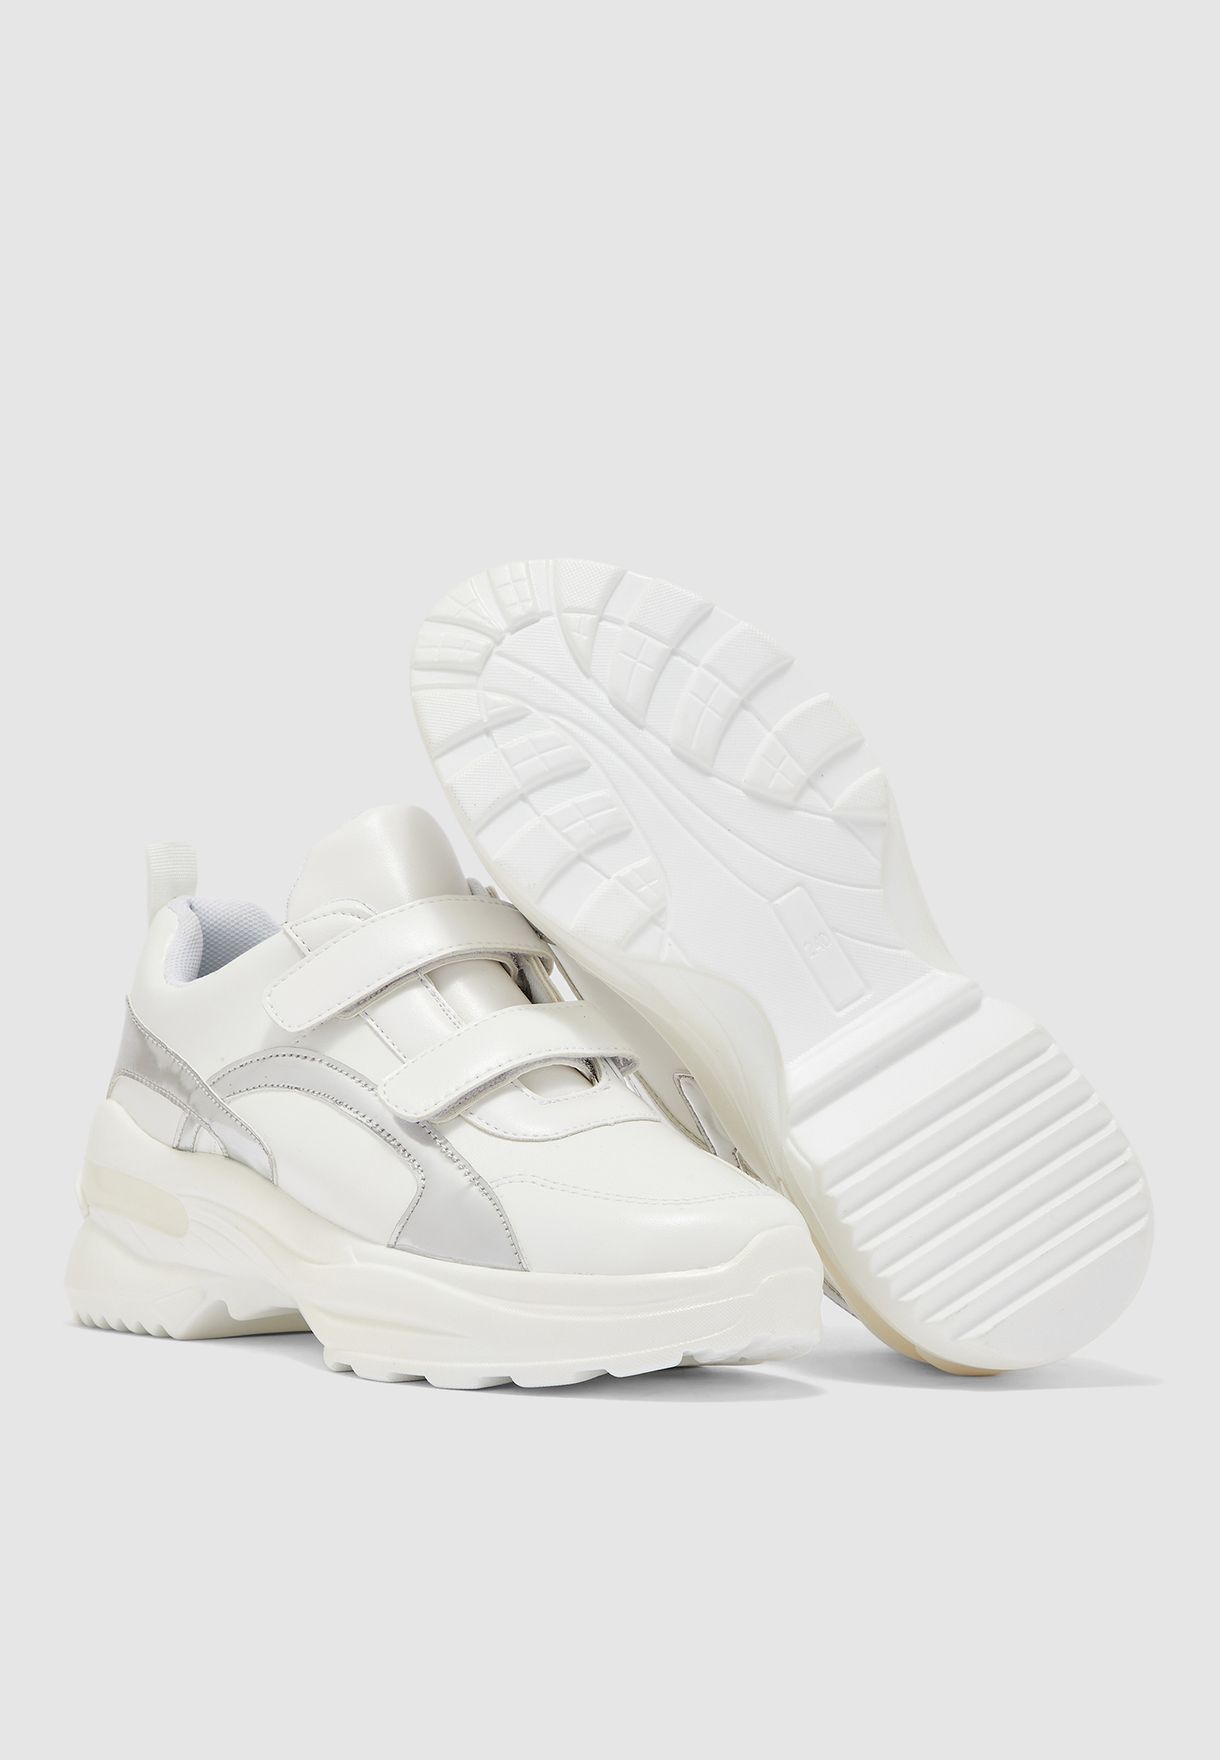 white tennis shoes with velcro straps